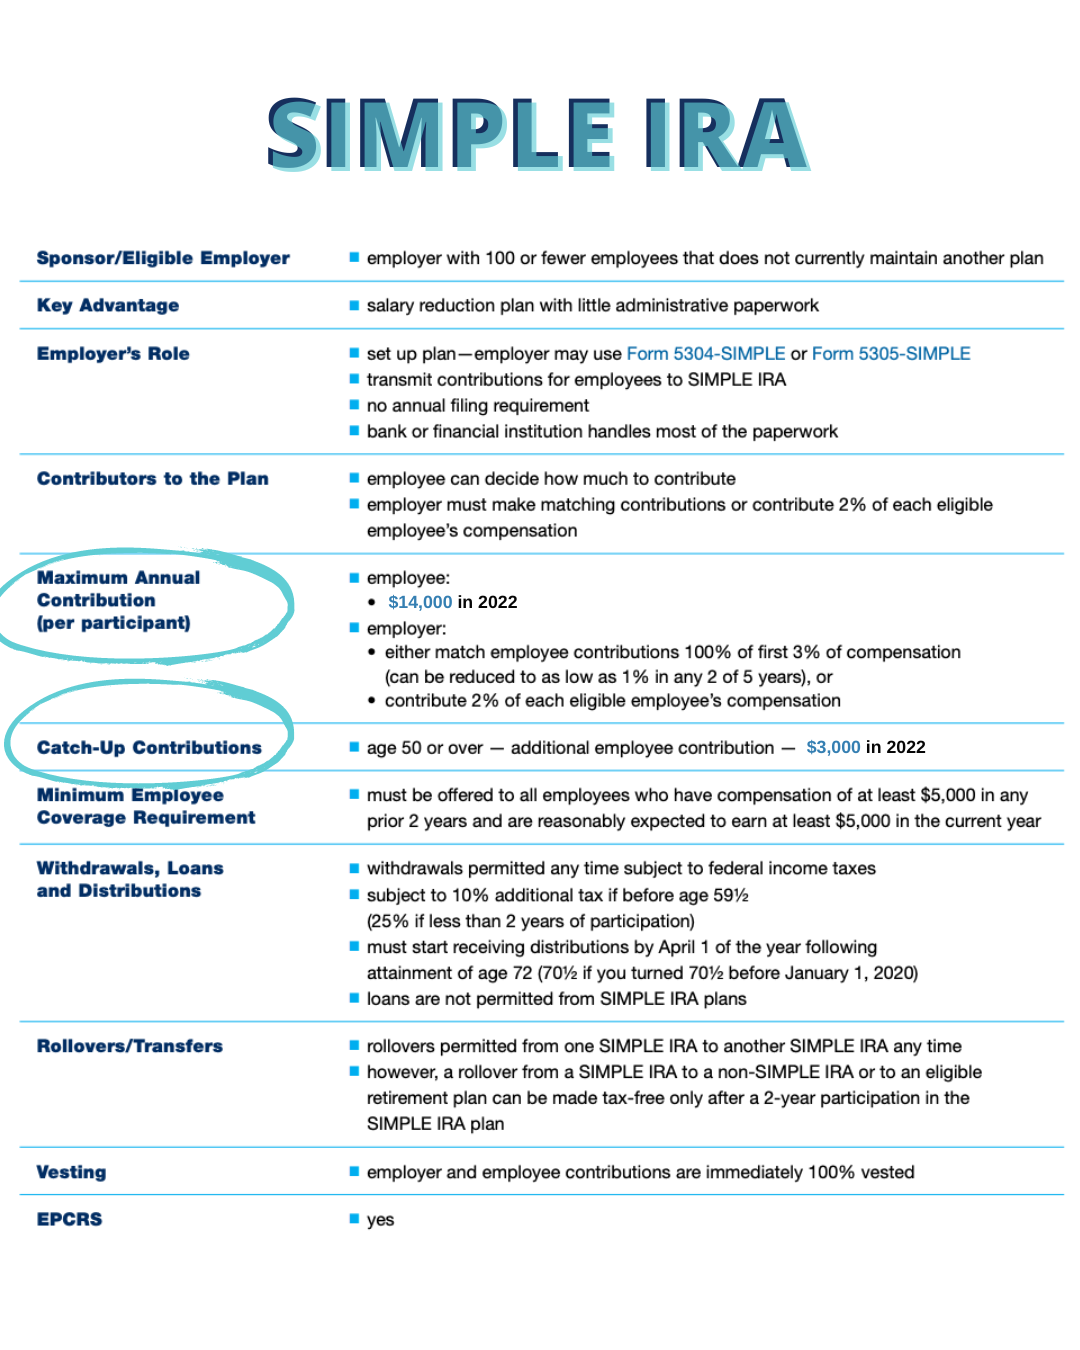 The Simple IRA